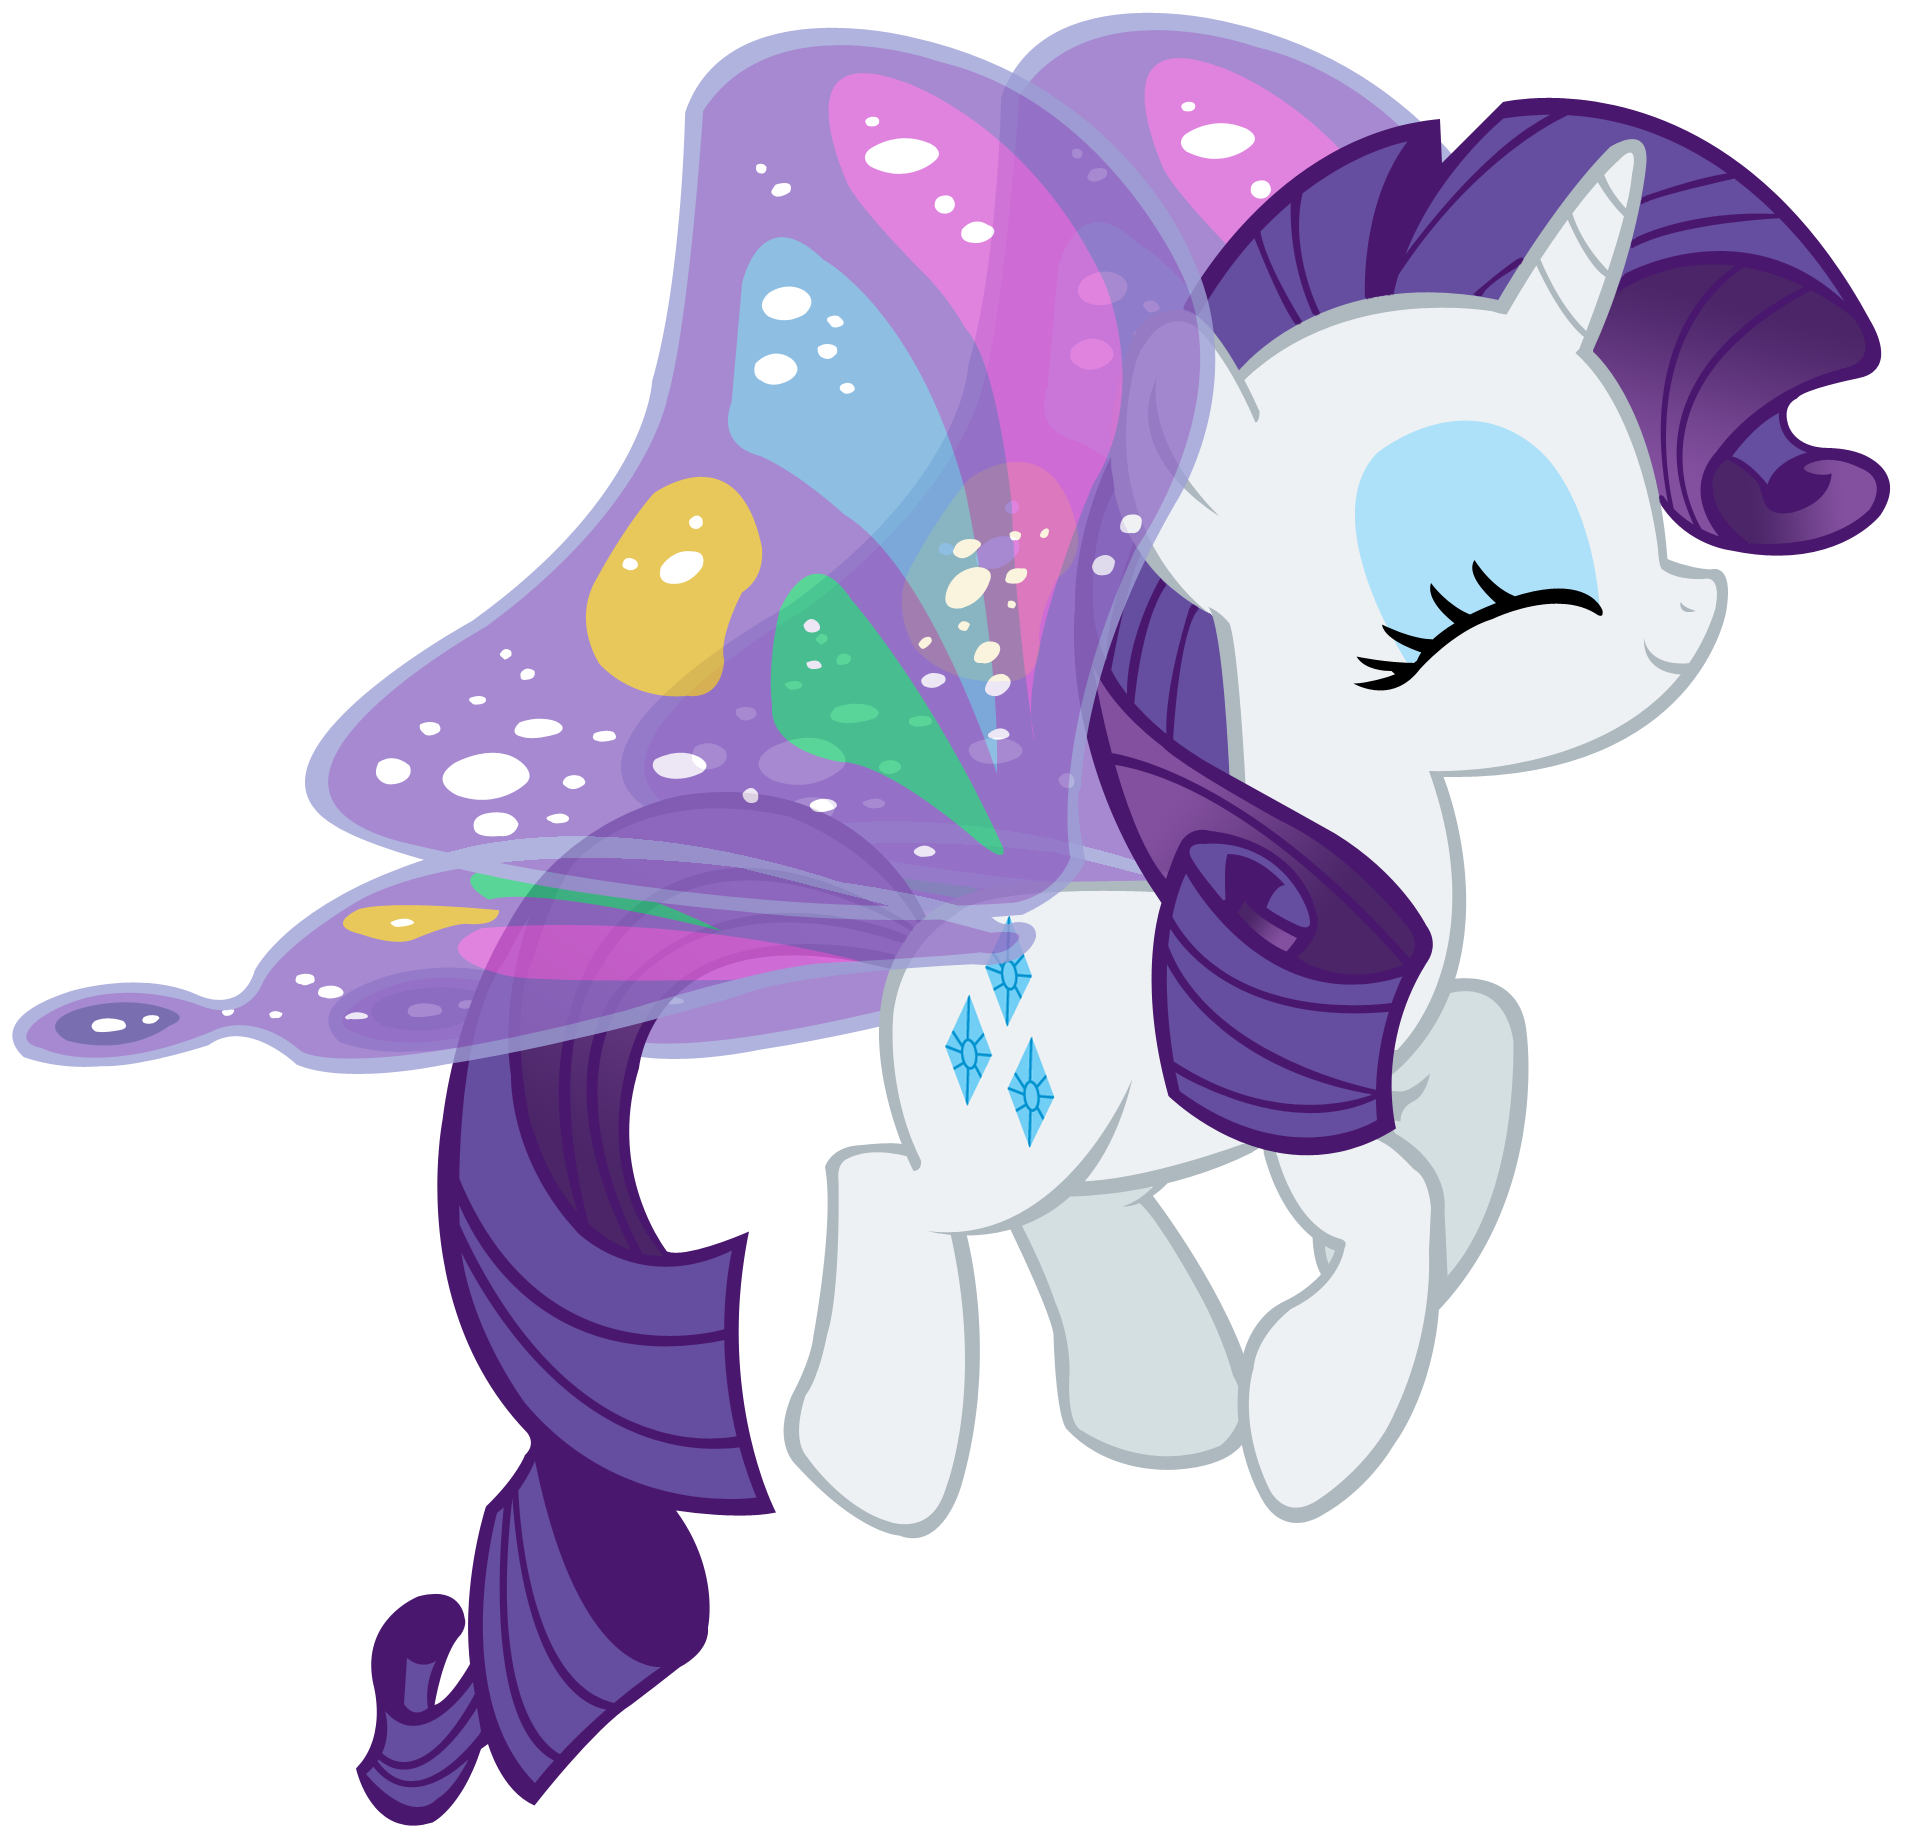 My Little Pony Rarity PNG Pic